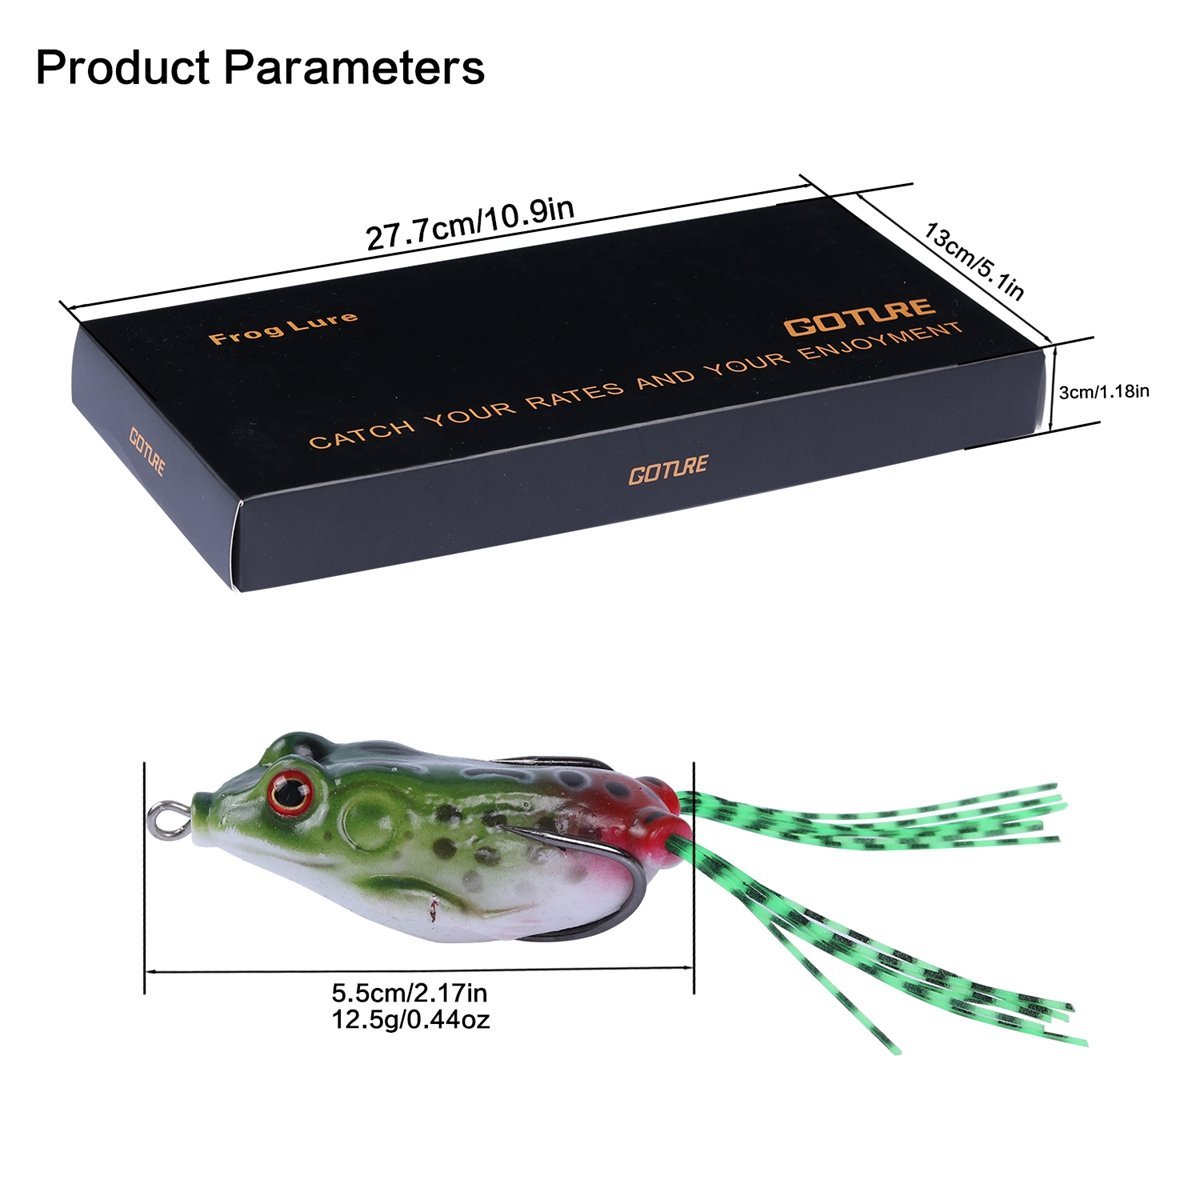 7cm Topwater Frog Popper: Soft, Lifelike, 14g Weight Ideal For